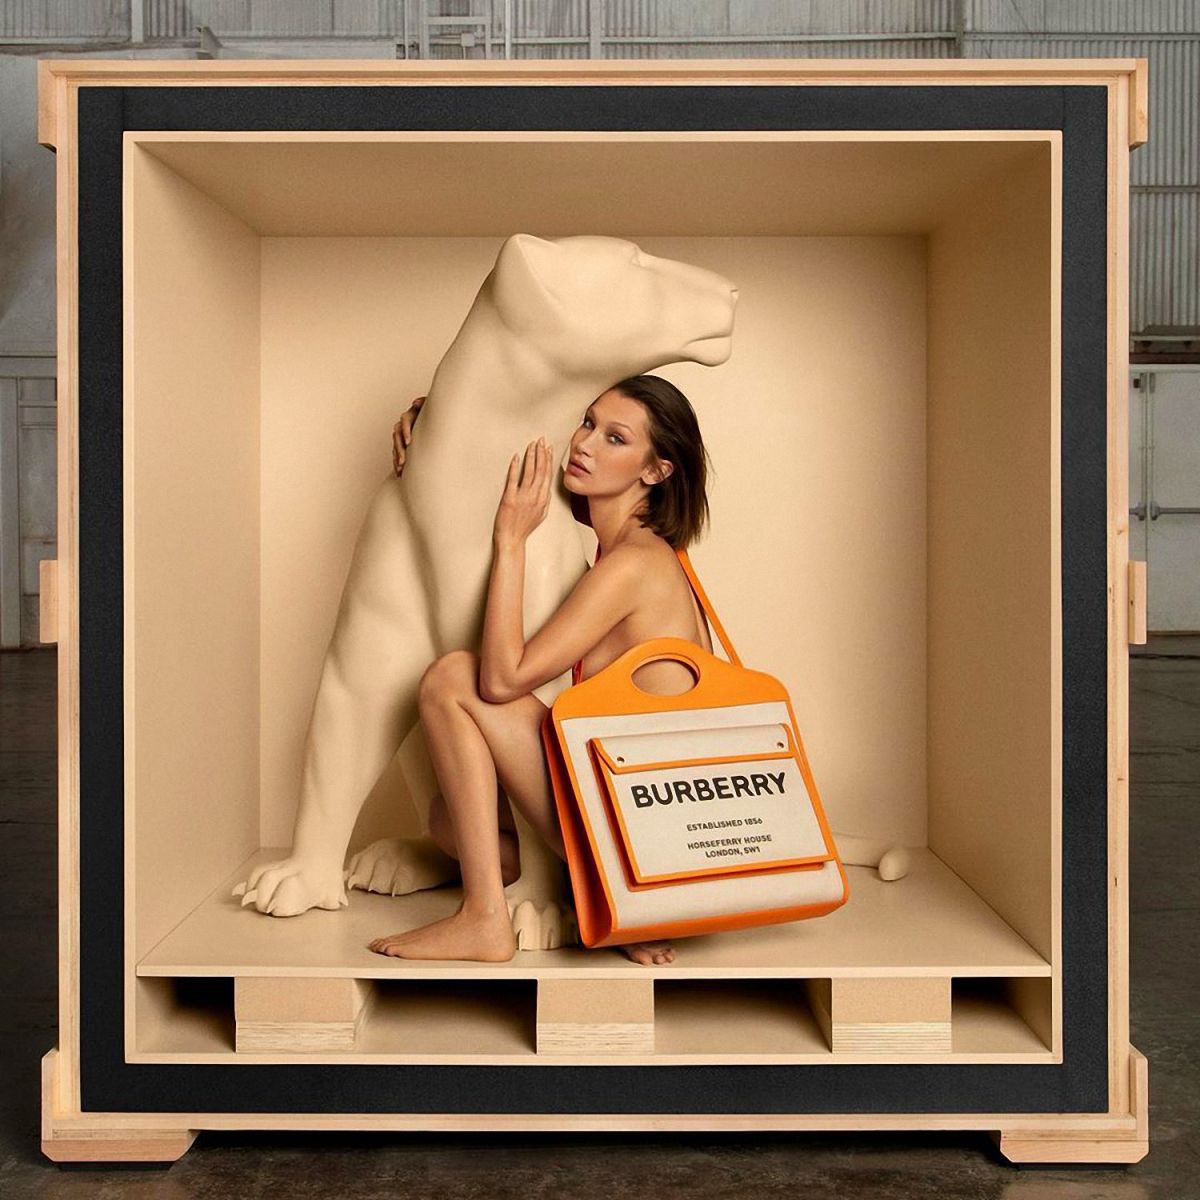 Bella Hadid For Burberrys Pocket Bag Campaign August